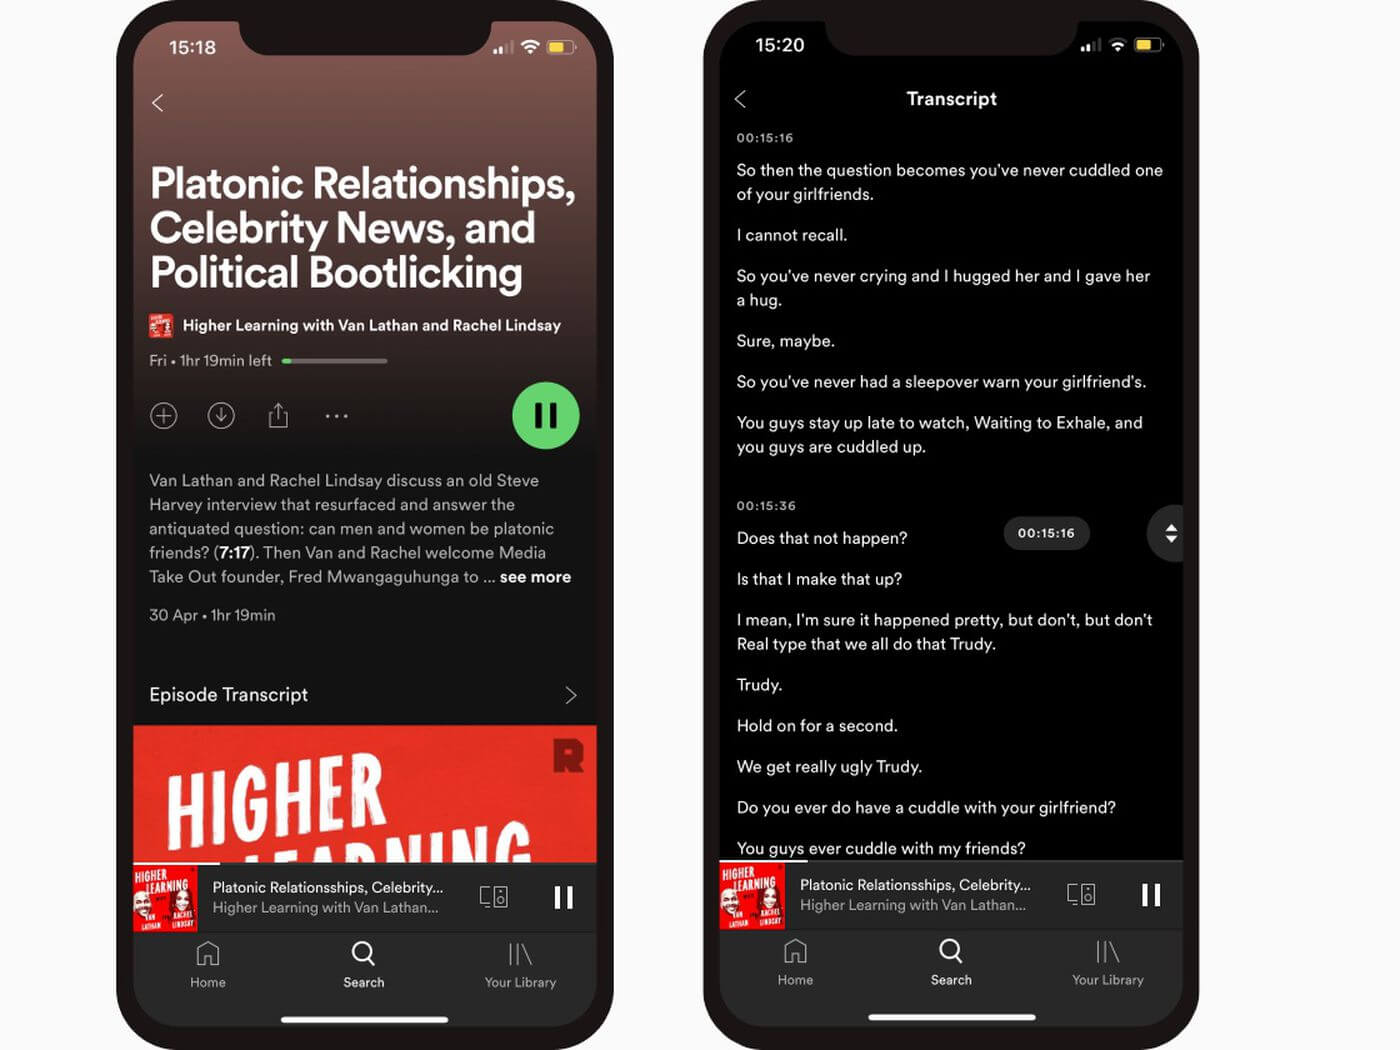 Spotify Announces New Transcription Feature For Podcasts - Good e